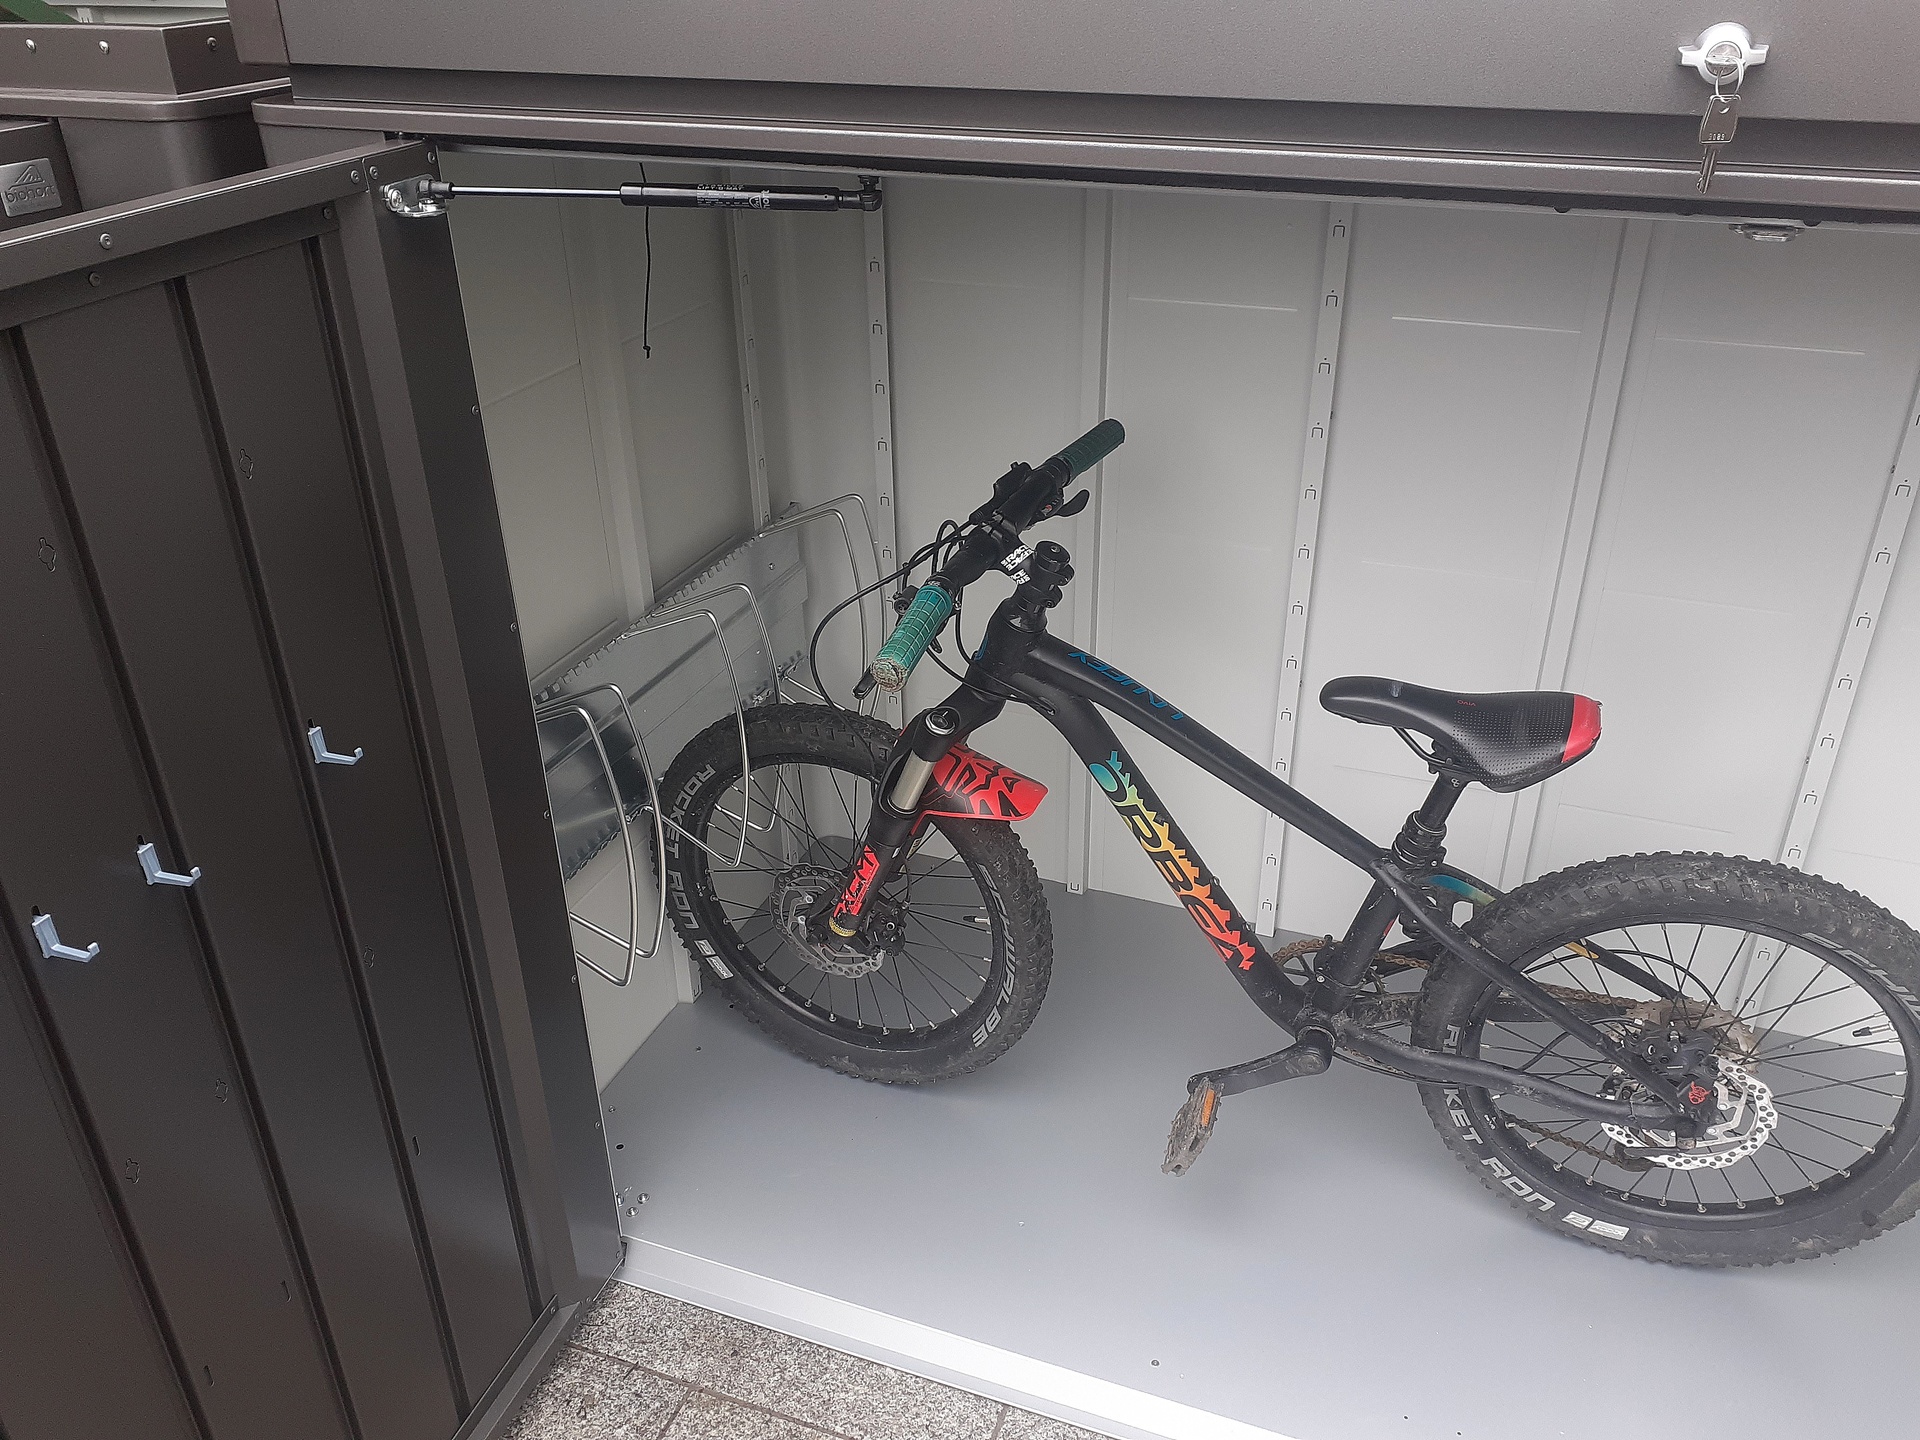 Biohort HighBoard 200 Storage Unit - a stylish & secure storage solution for Bins, Bikes etc  | Supplied + Fitted in Castleknock, Dublin 15 by Owen Chubb Landscapers.